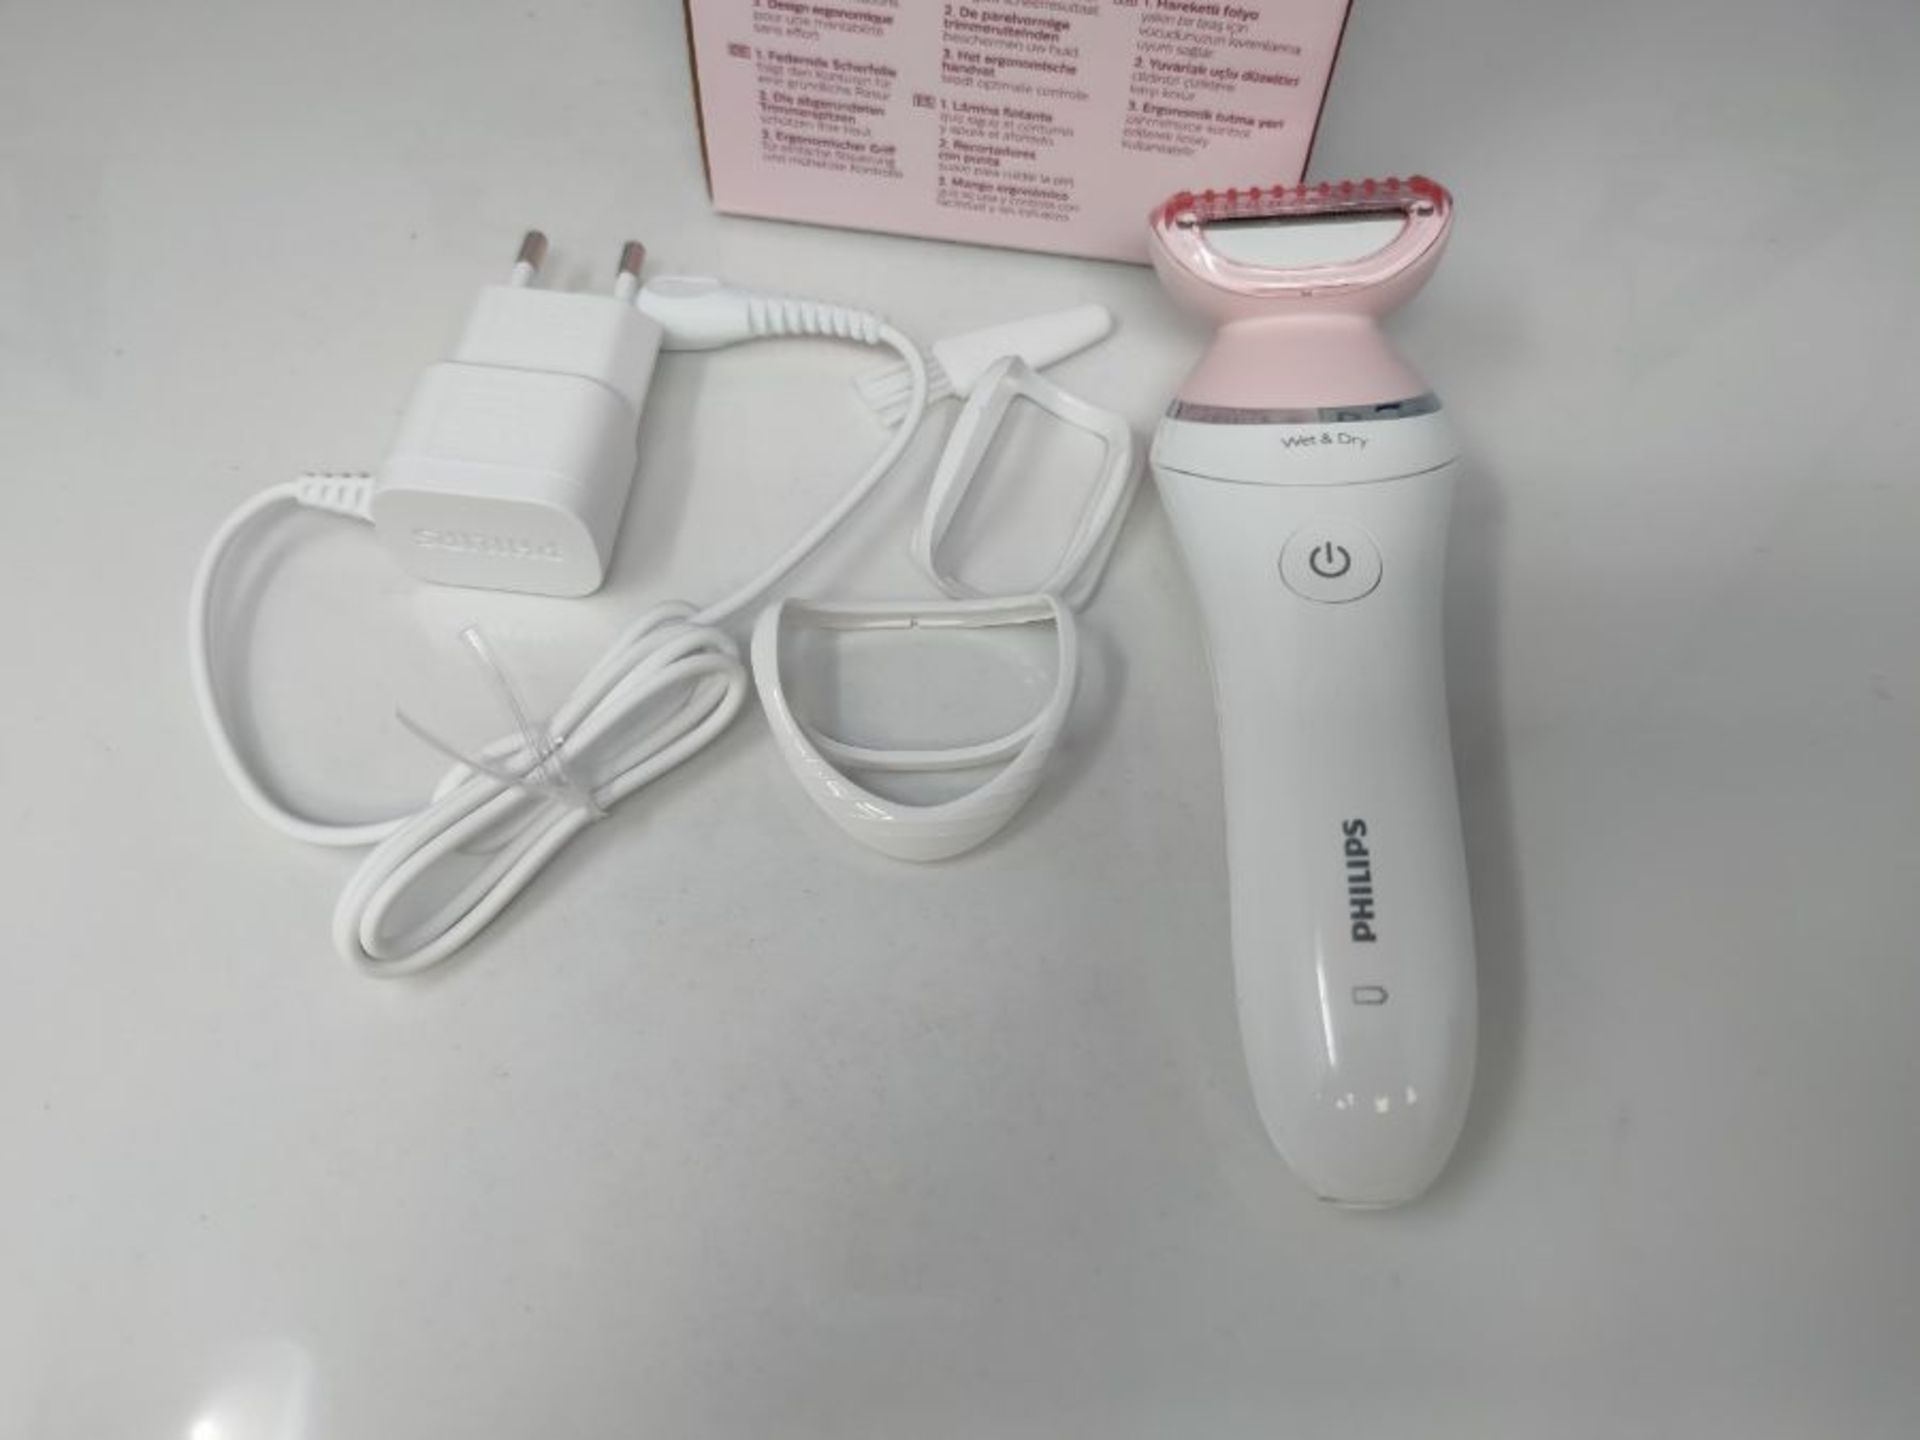 Philips SatinShave Advanced Wet and Dry Rechargeable Lady Shaver, Cordless Electric Ra - Image 3 of 3